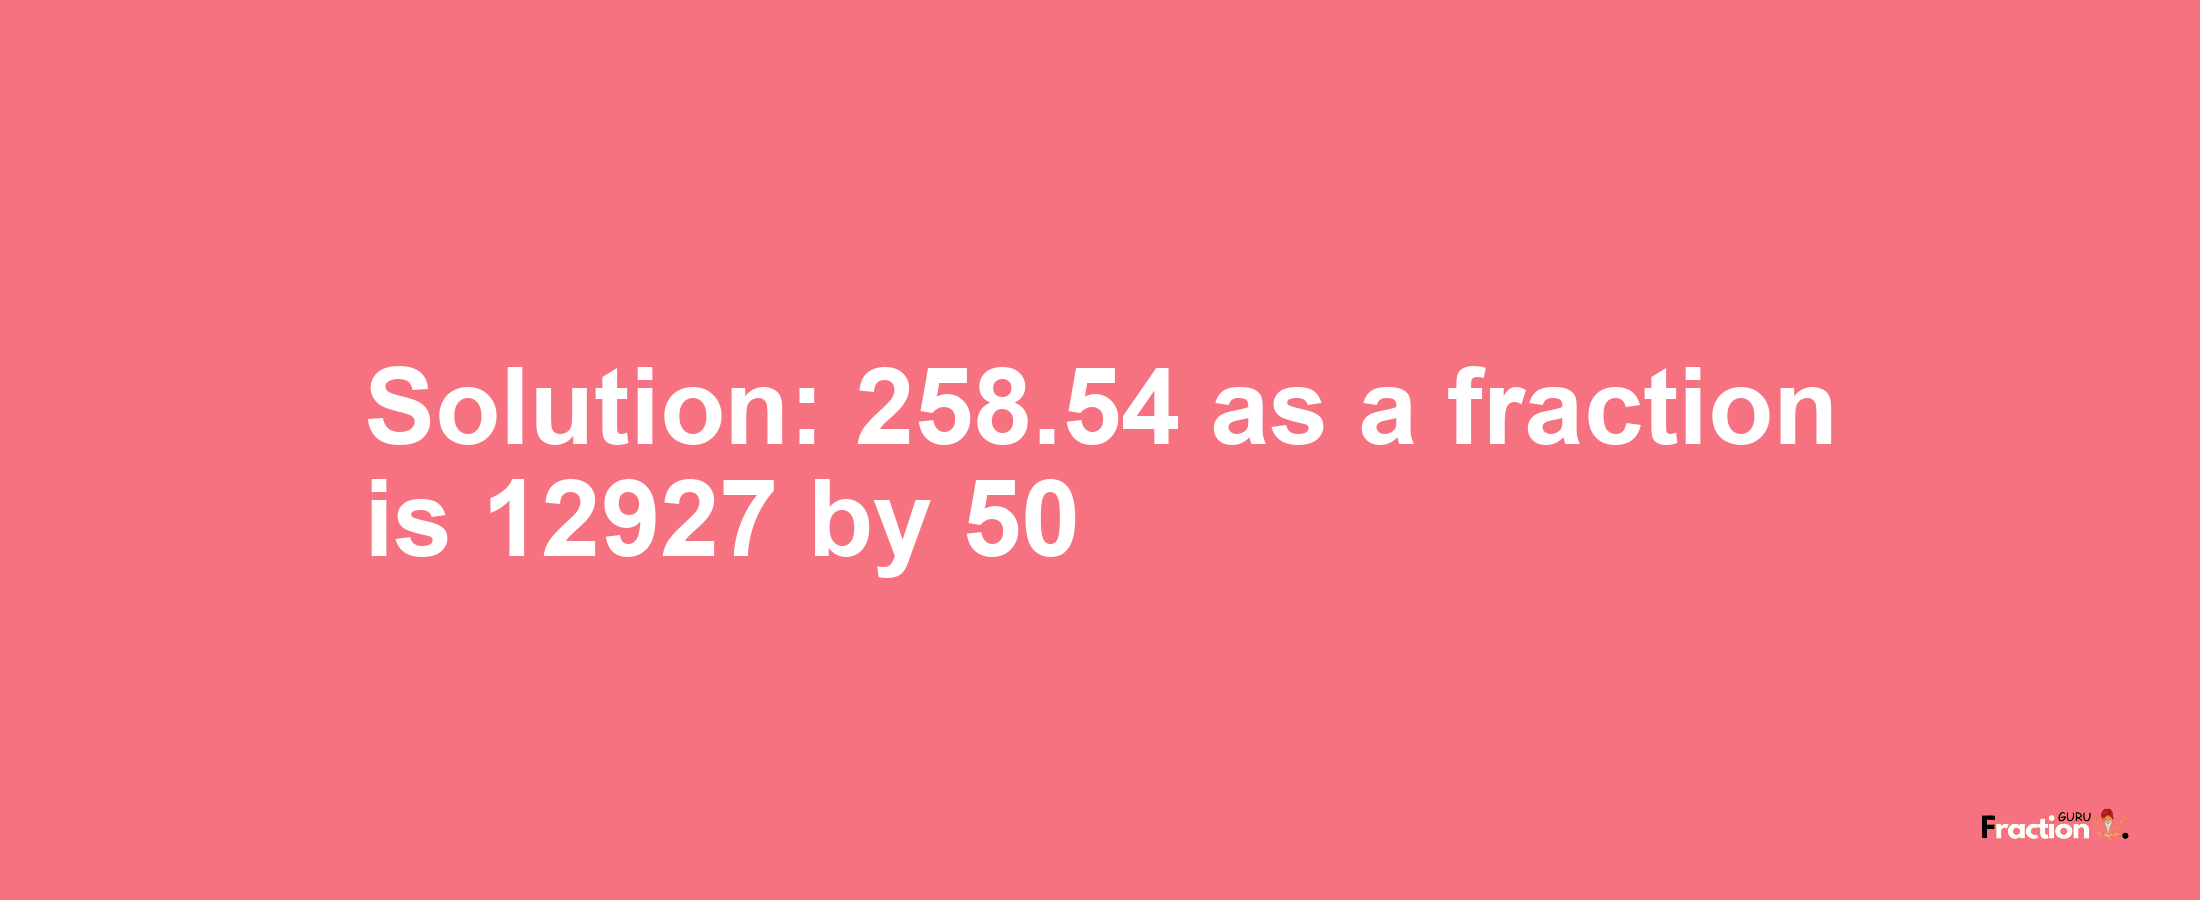 Solution:258.54 as a fraction is 12927/50